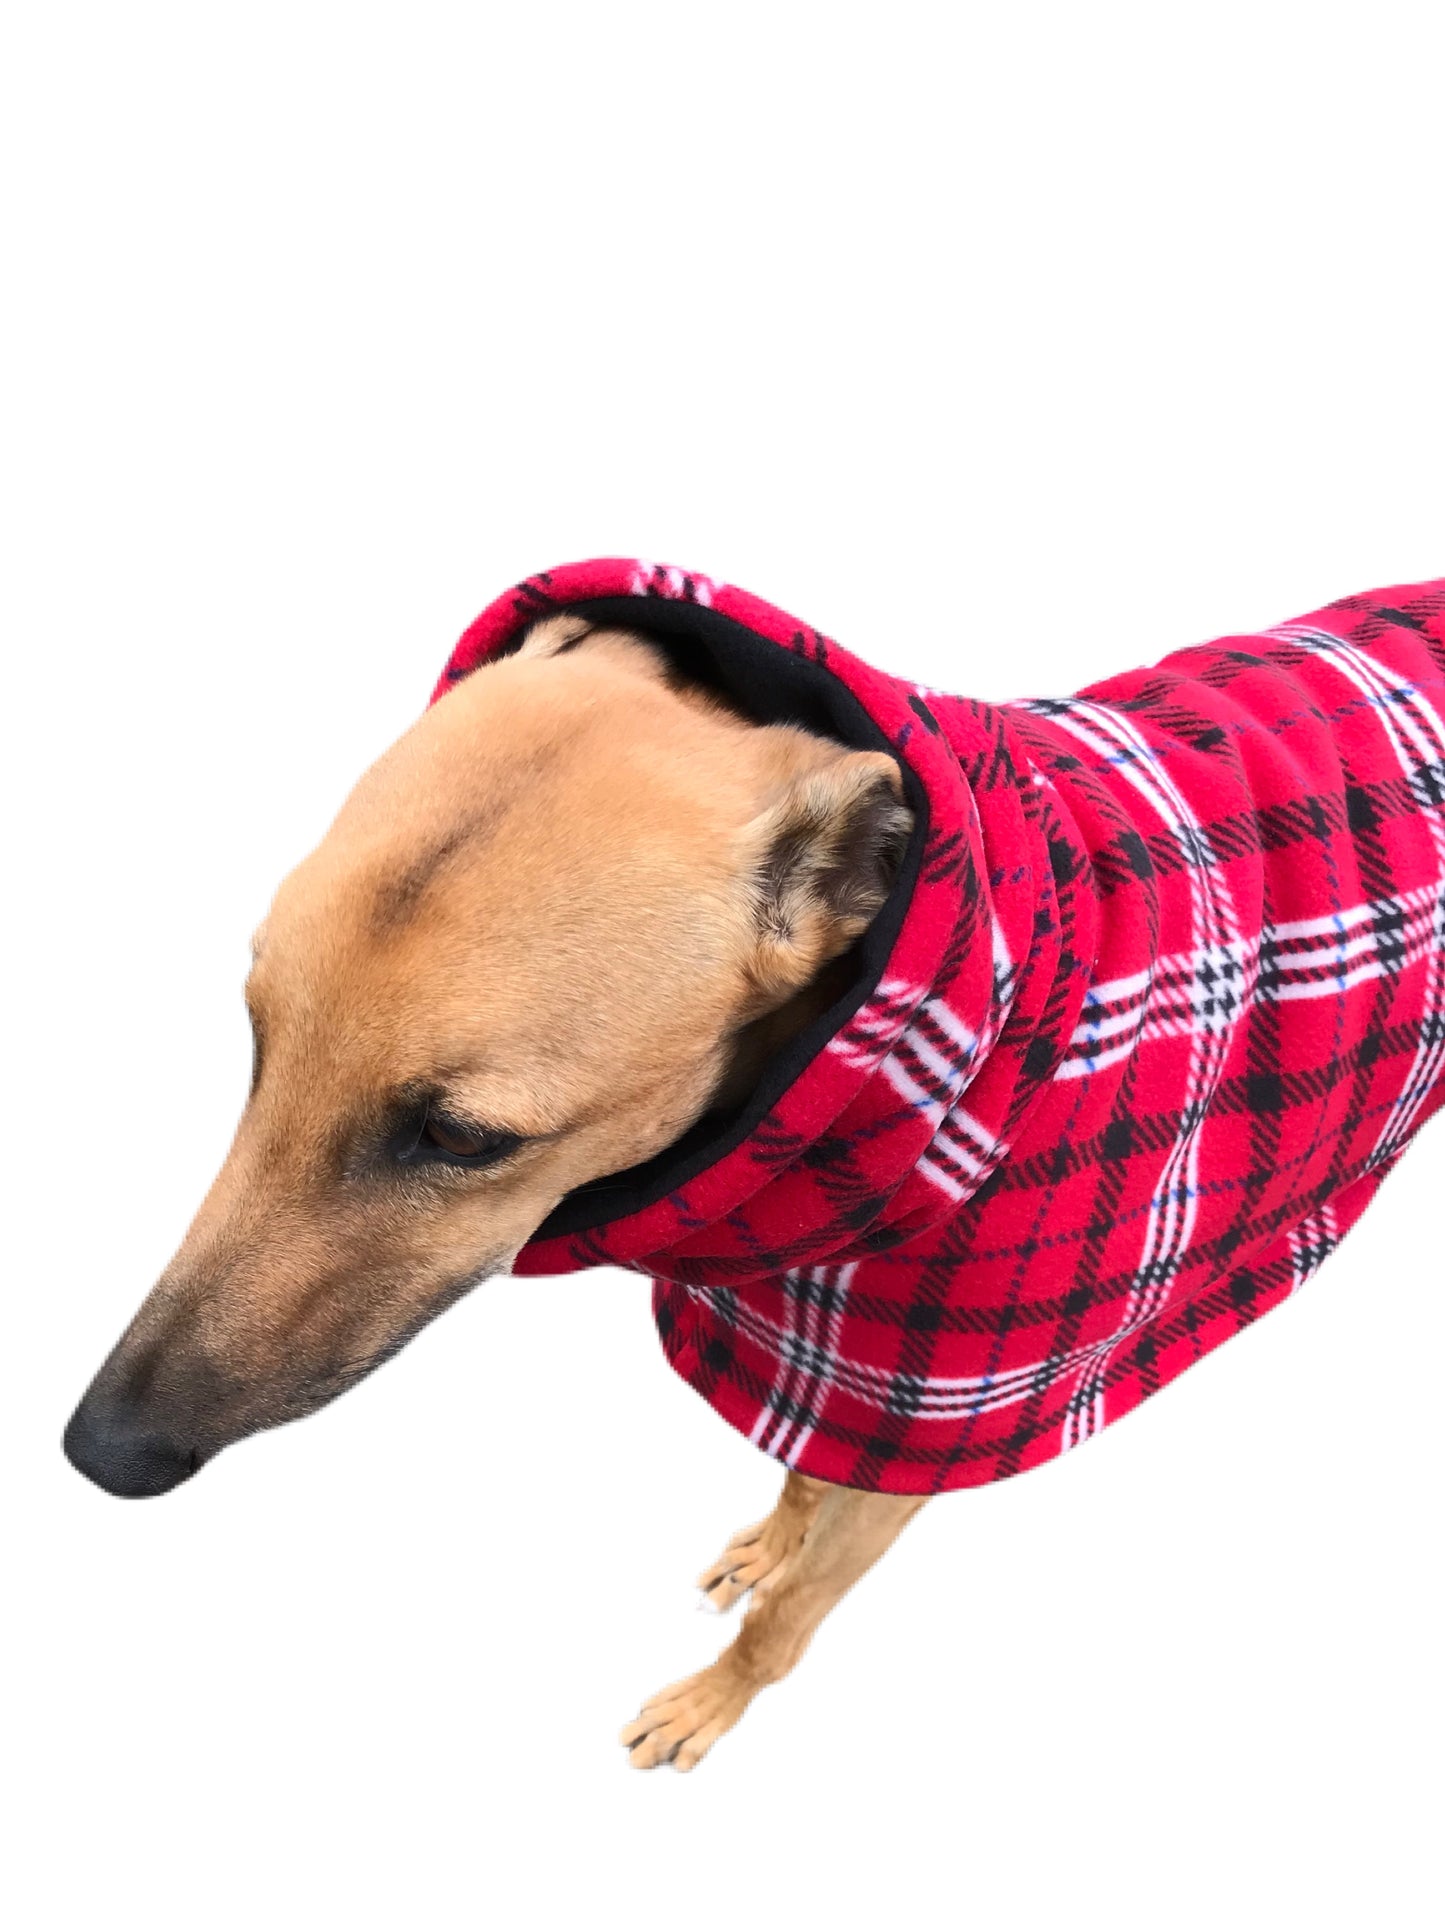 Scotch red flanno print deluxe style greyhound coat Sherpa lined double polar fleece washable